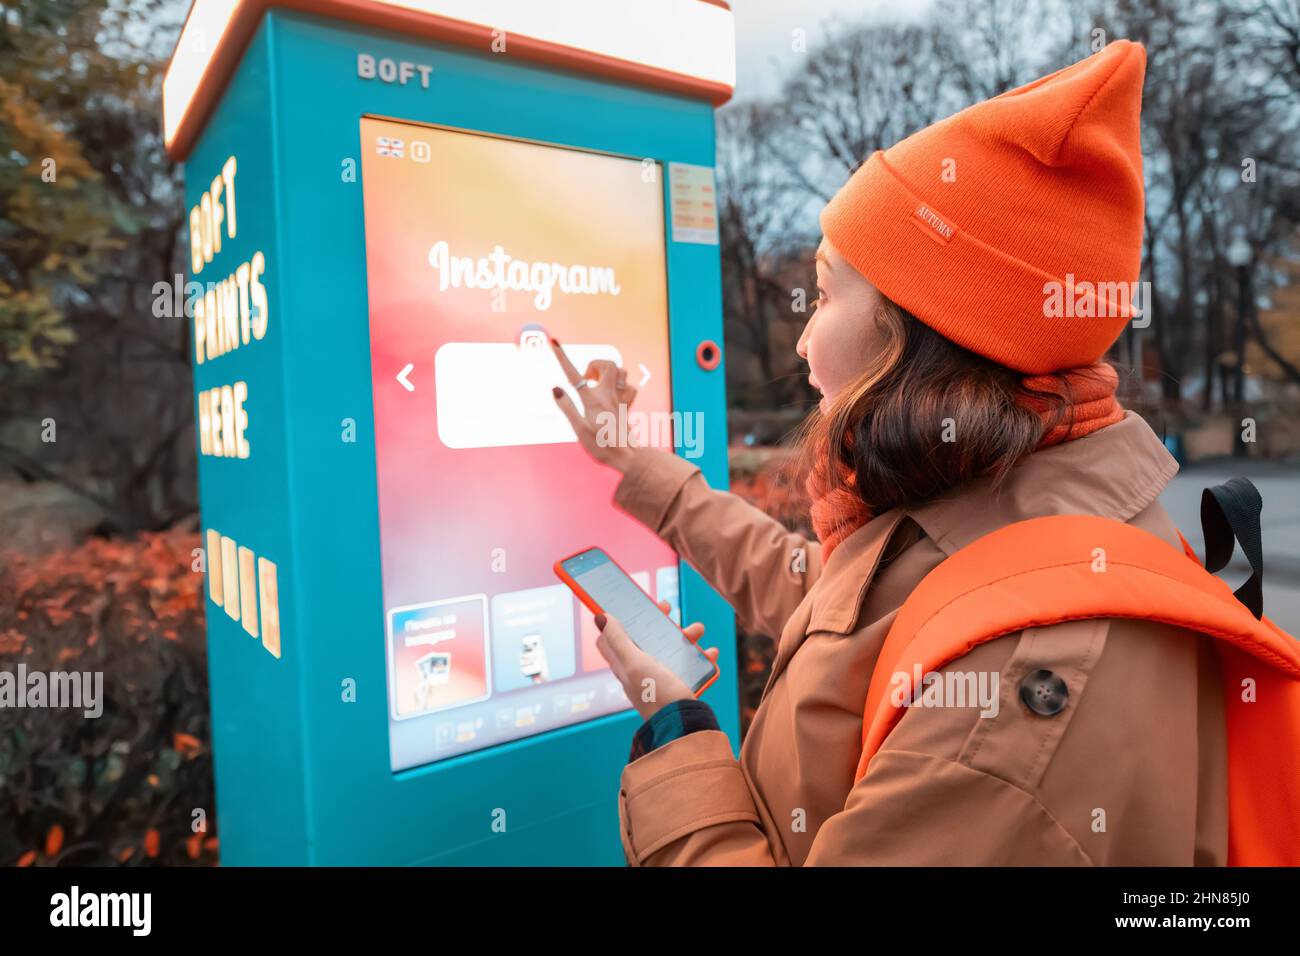 19 October 2021, Moscow, Russia: woman uses a self-service kiosk to print photos from her smartphone on a city street Stock Photo